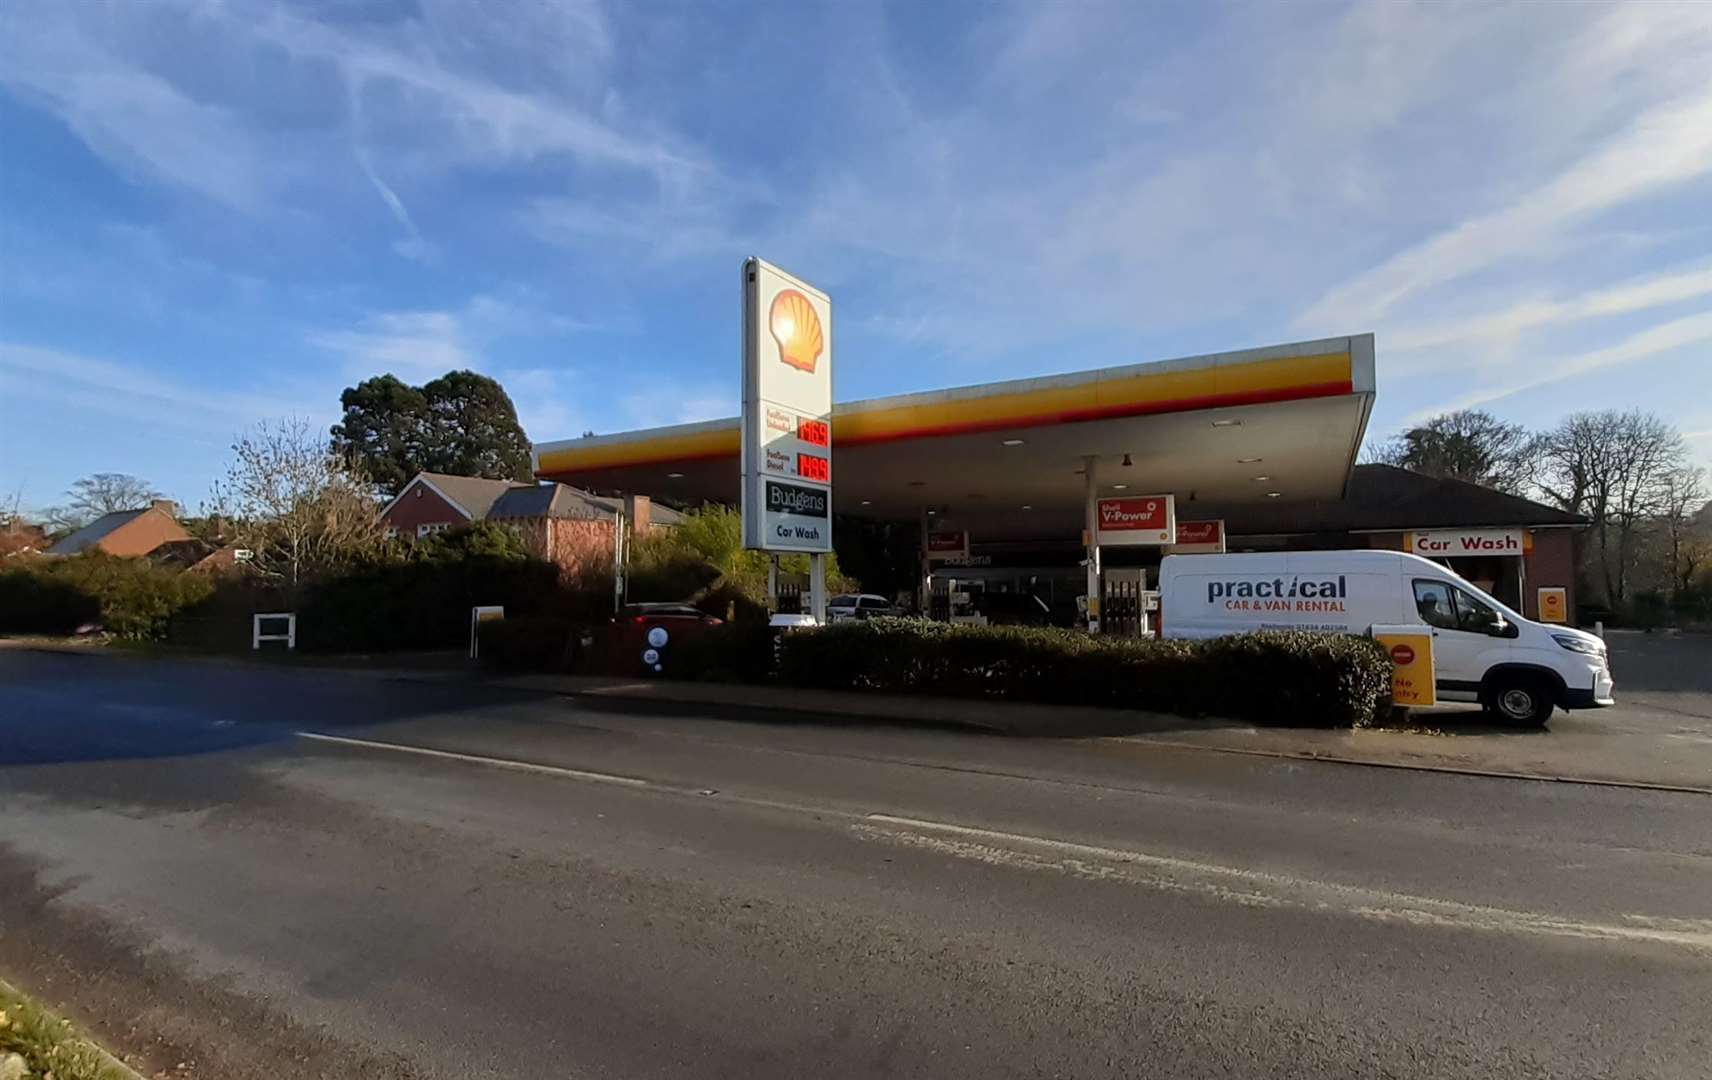 The Shell petrol station on the A229, in Sissinghurst, where Alexandra Morgan was last seen